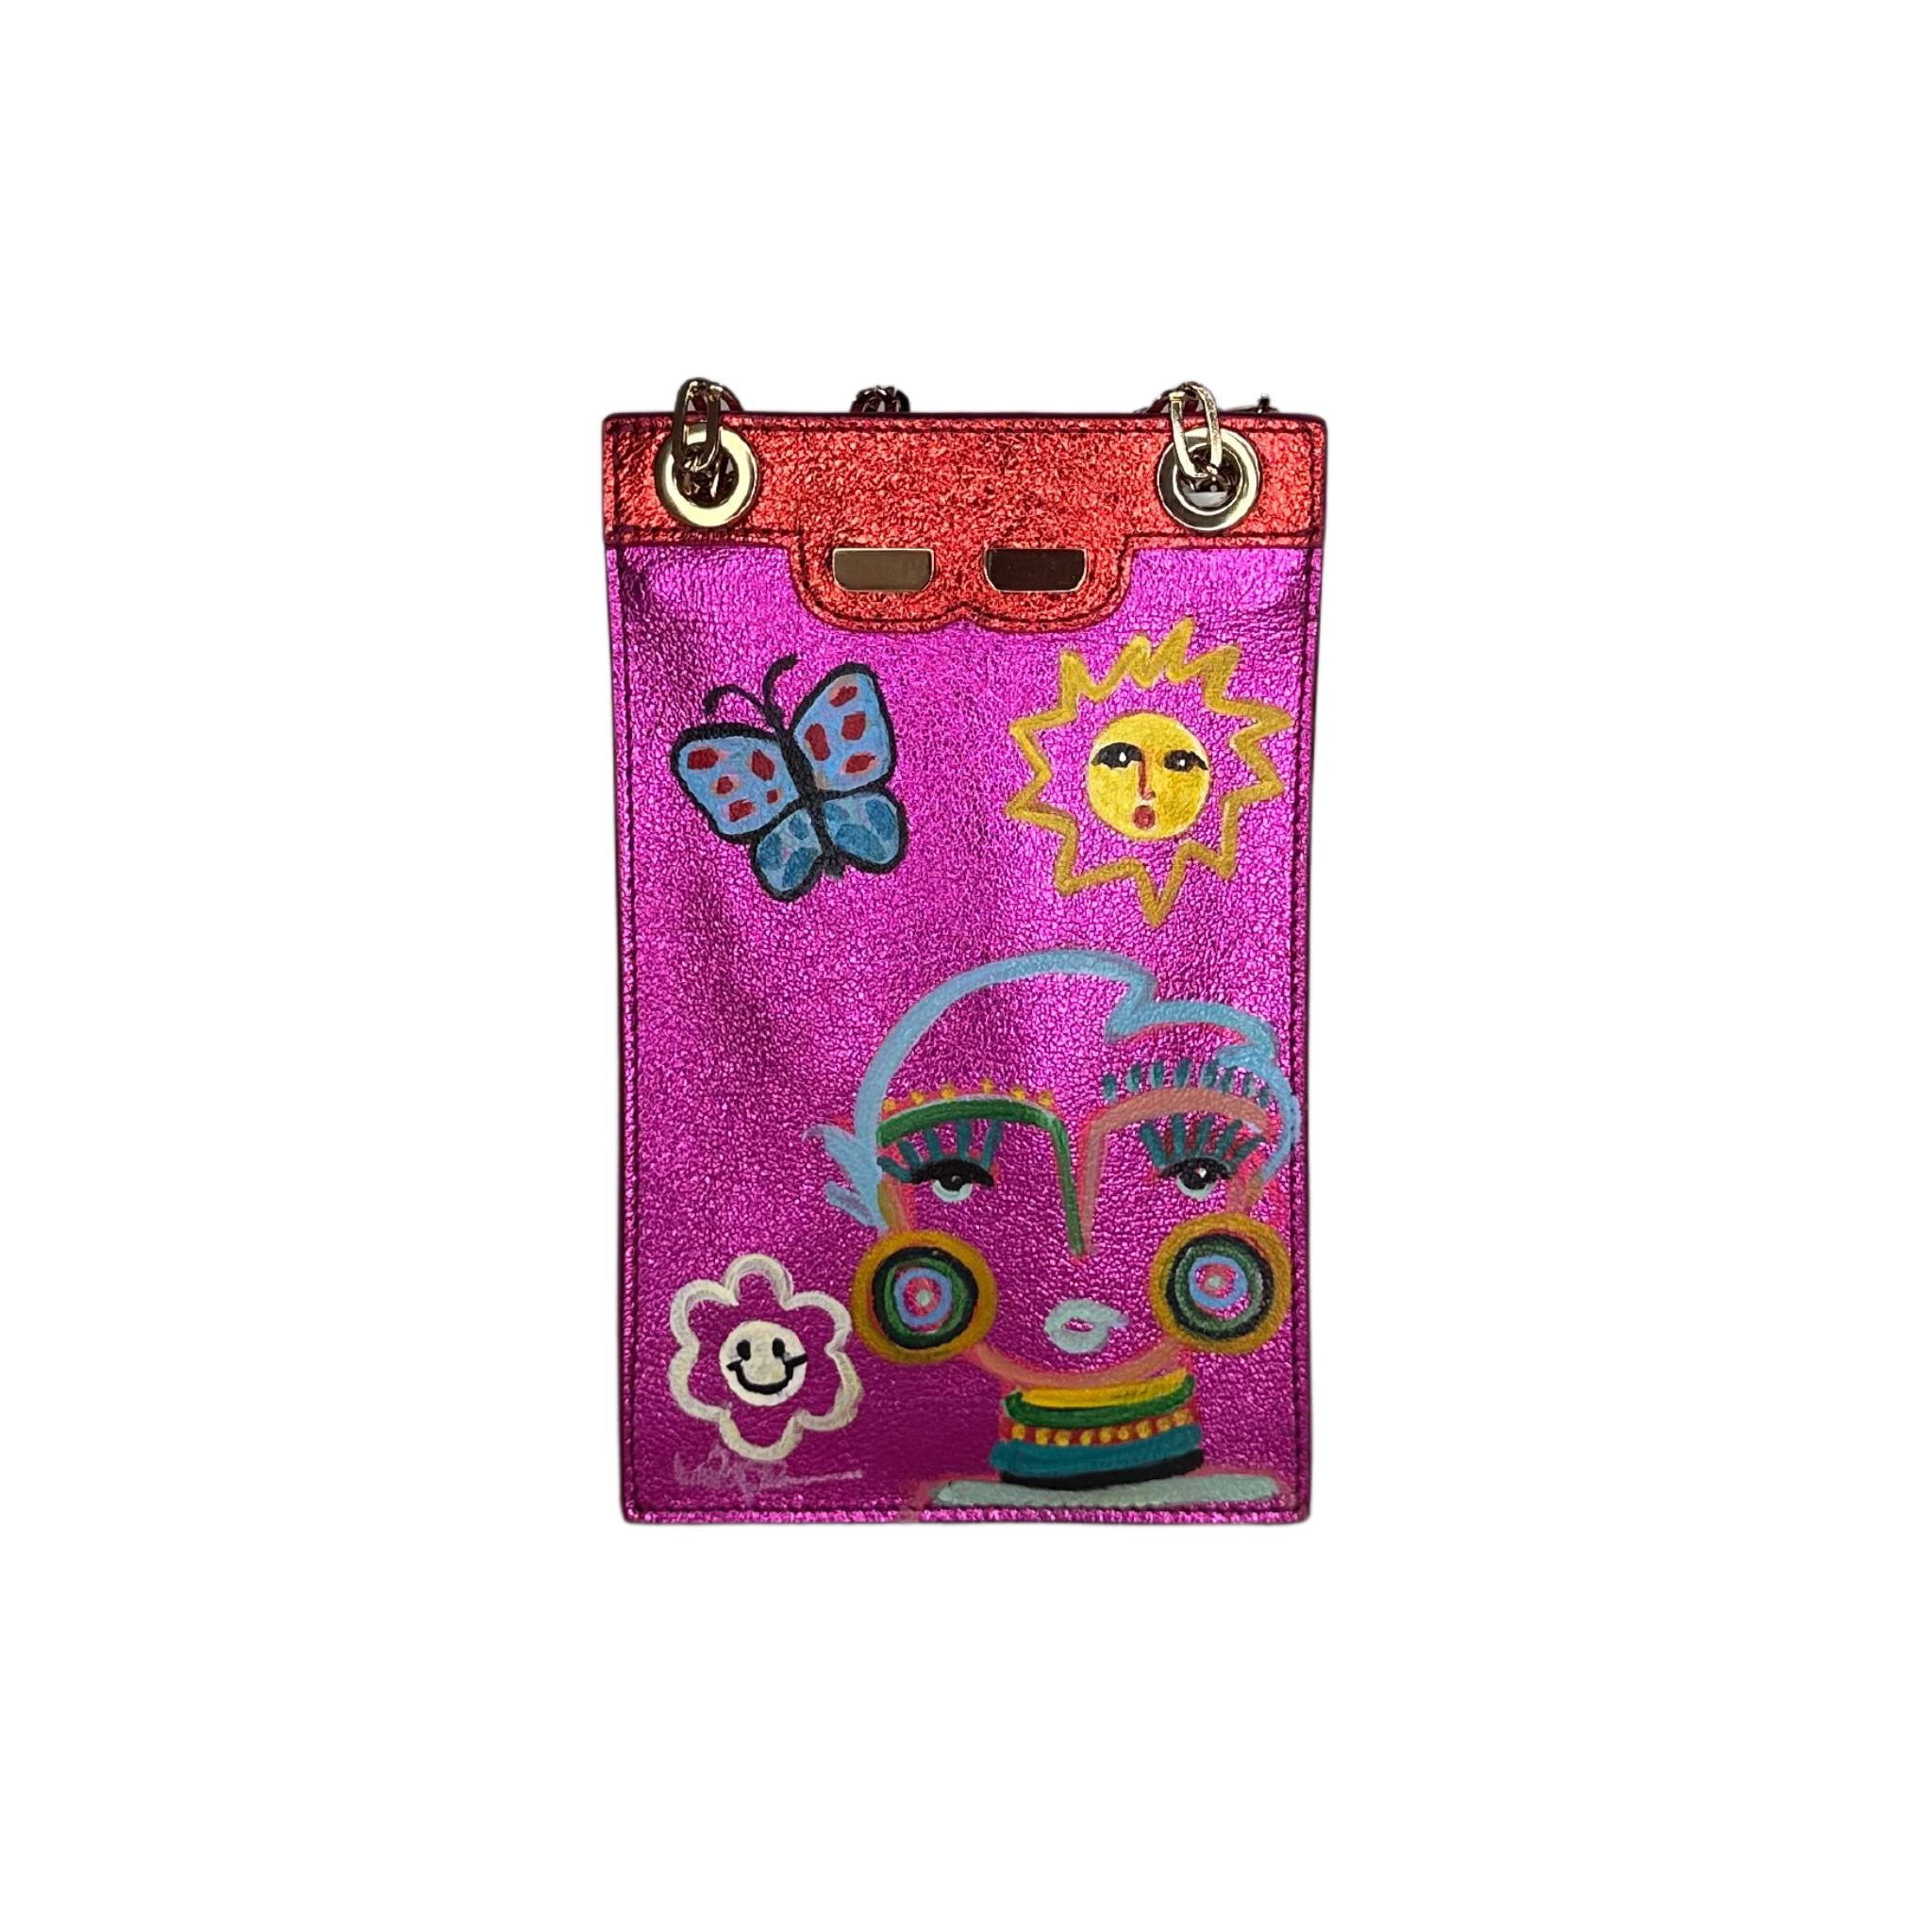 Catherine Cellphone Pouch in Pink and Red Trim